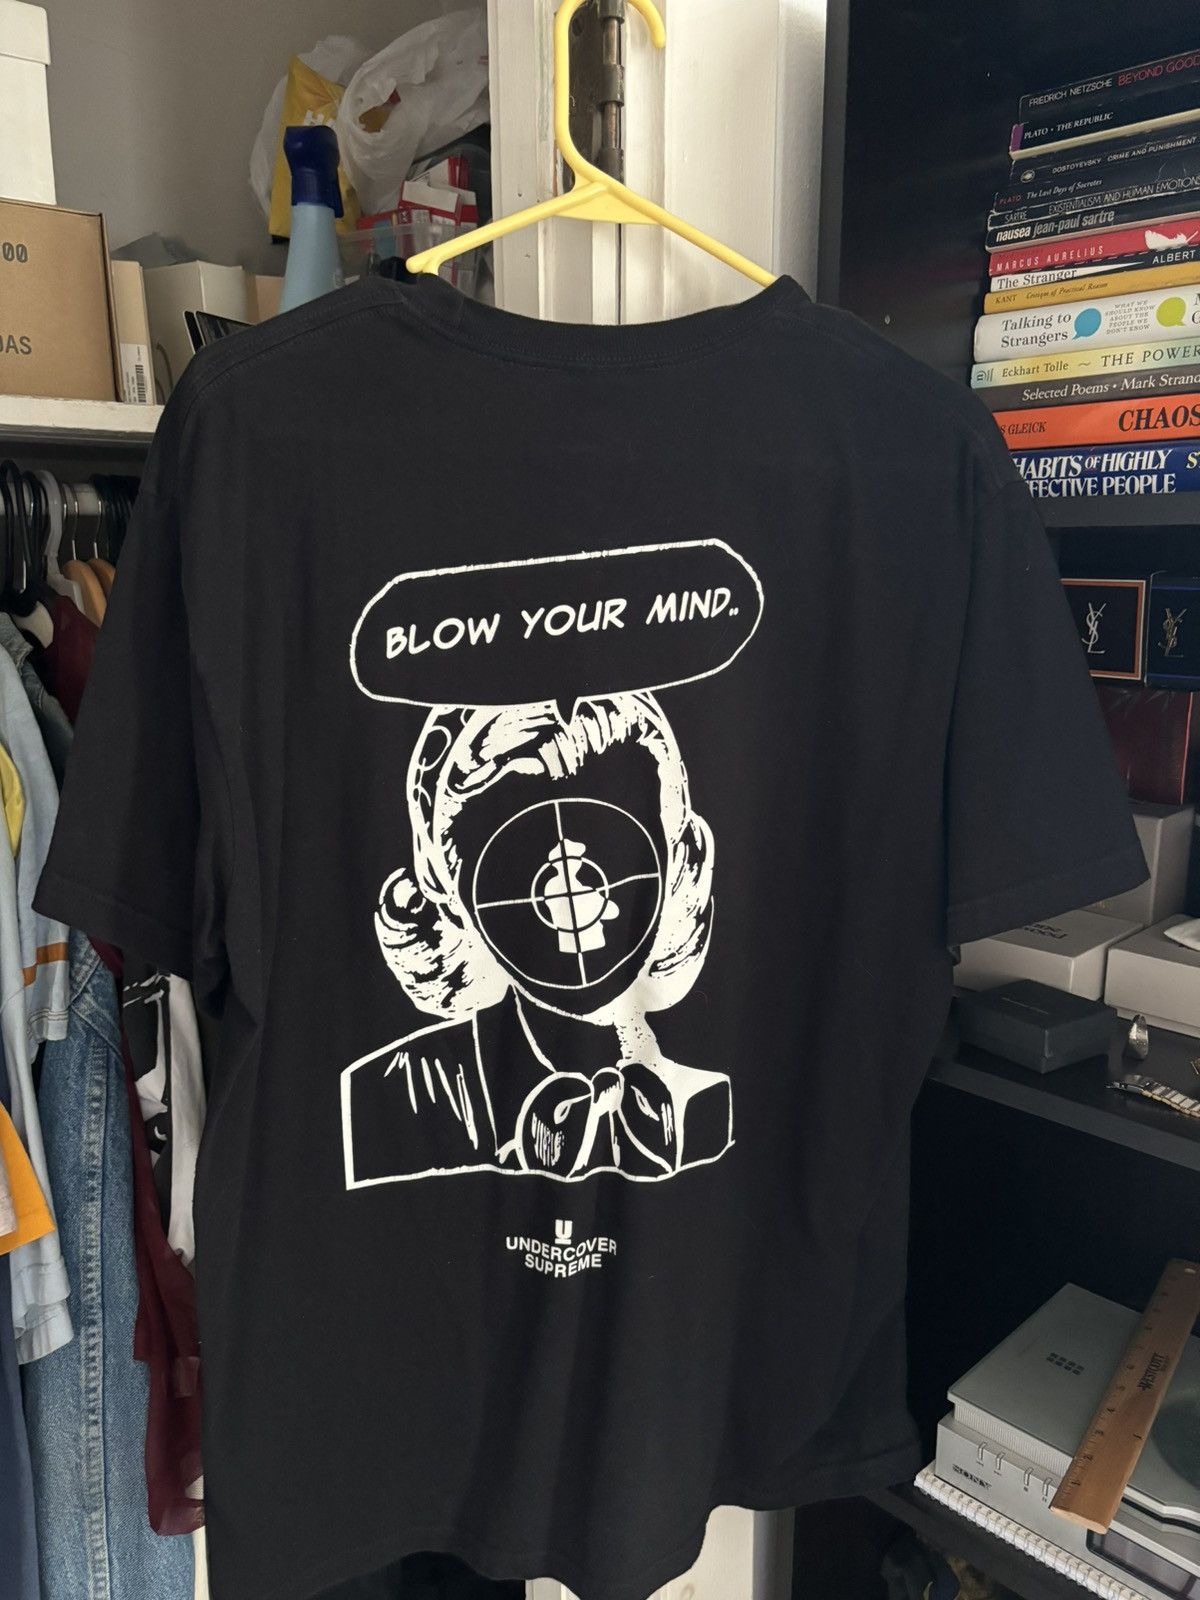 Supreme Undercover u0026 Public Enemy “Blow Your Mind” Tee | Grailed